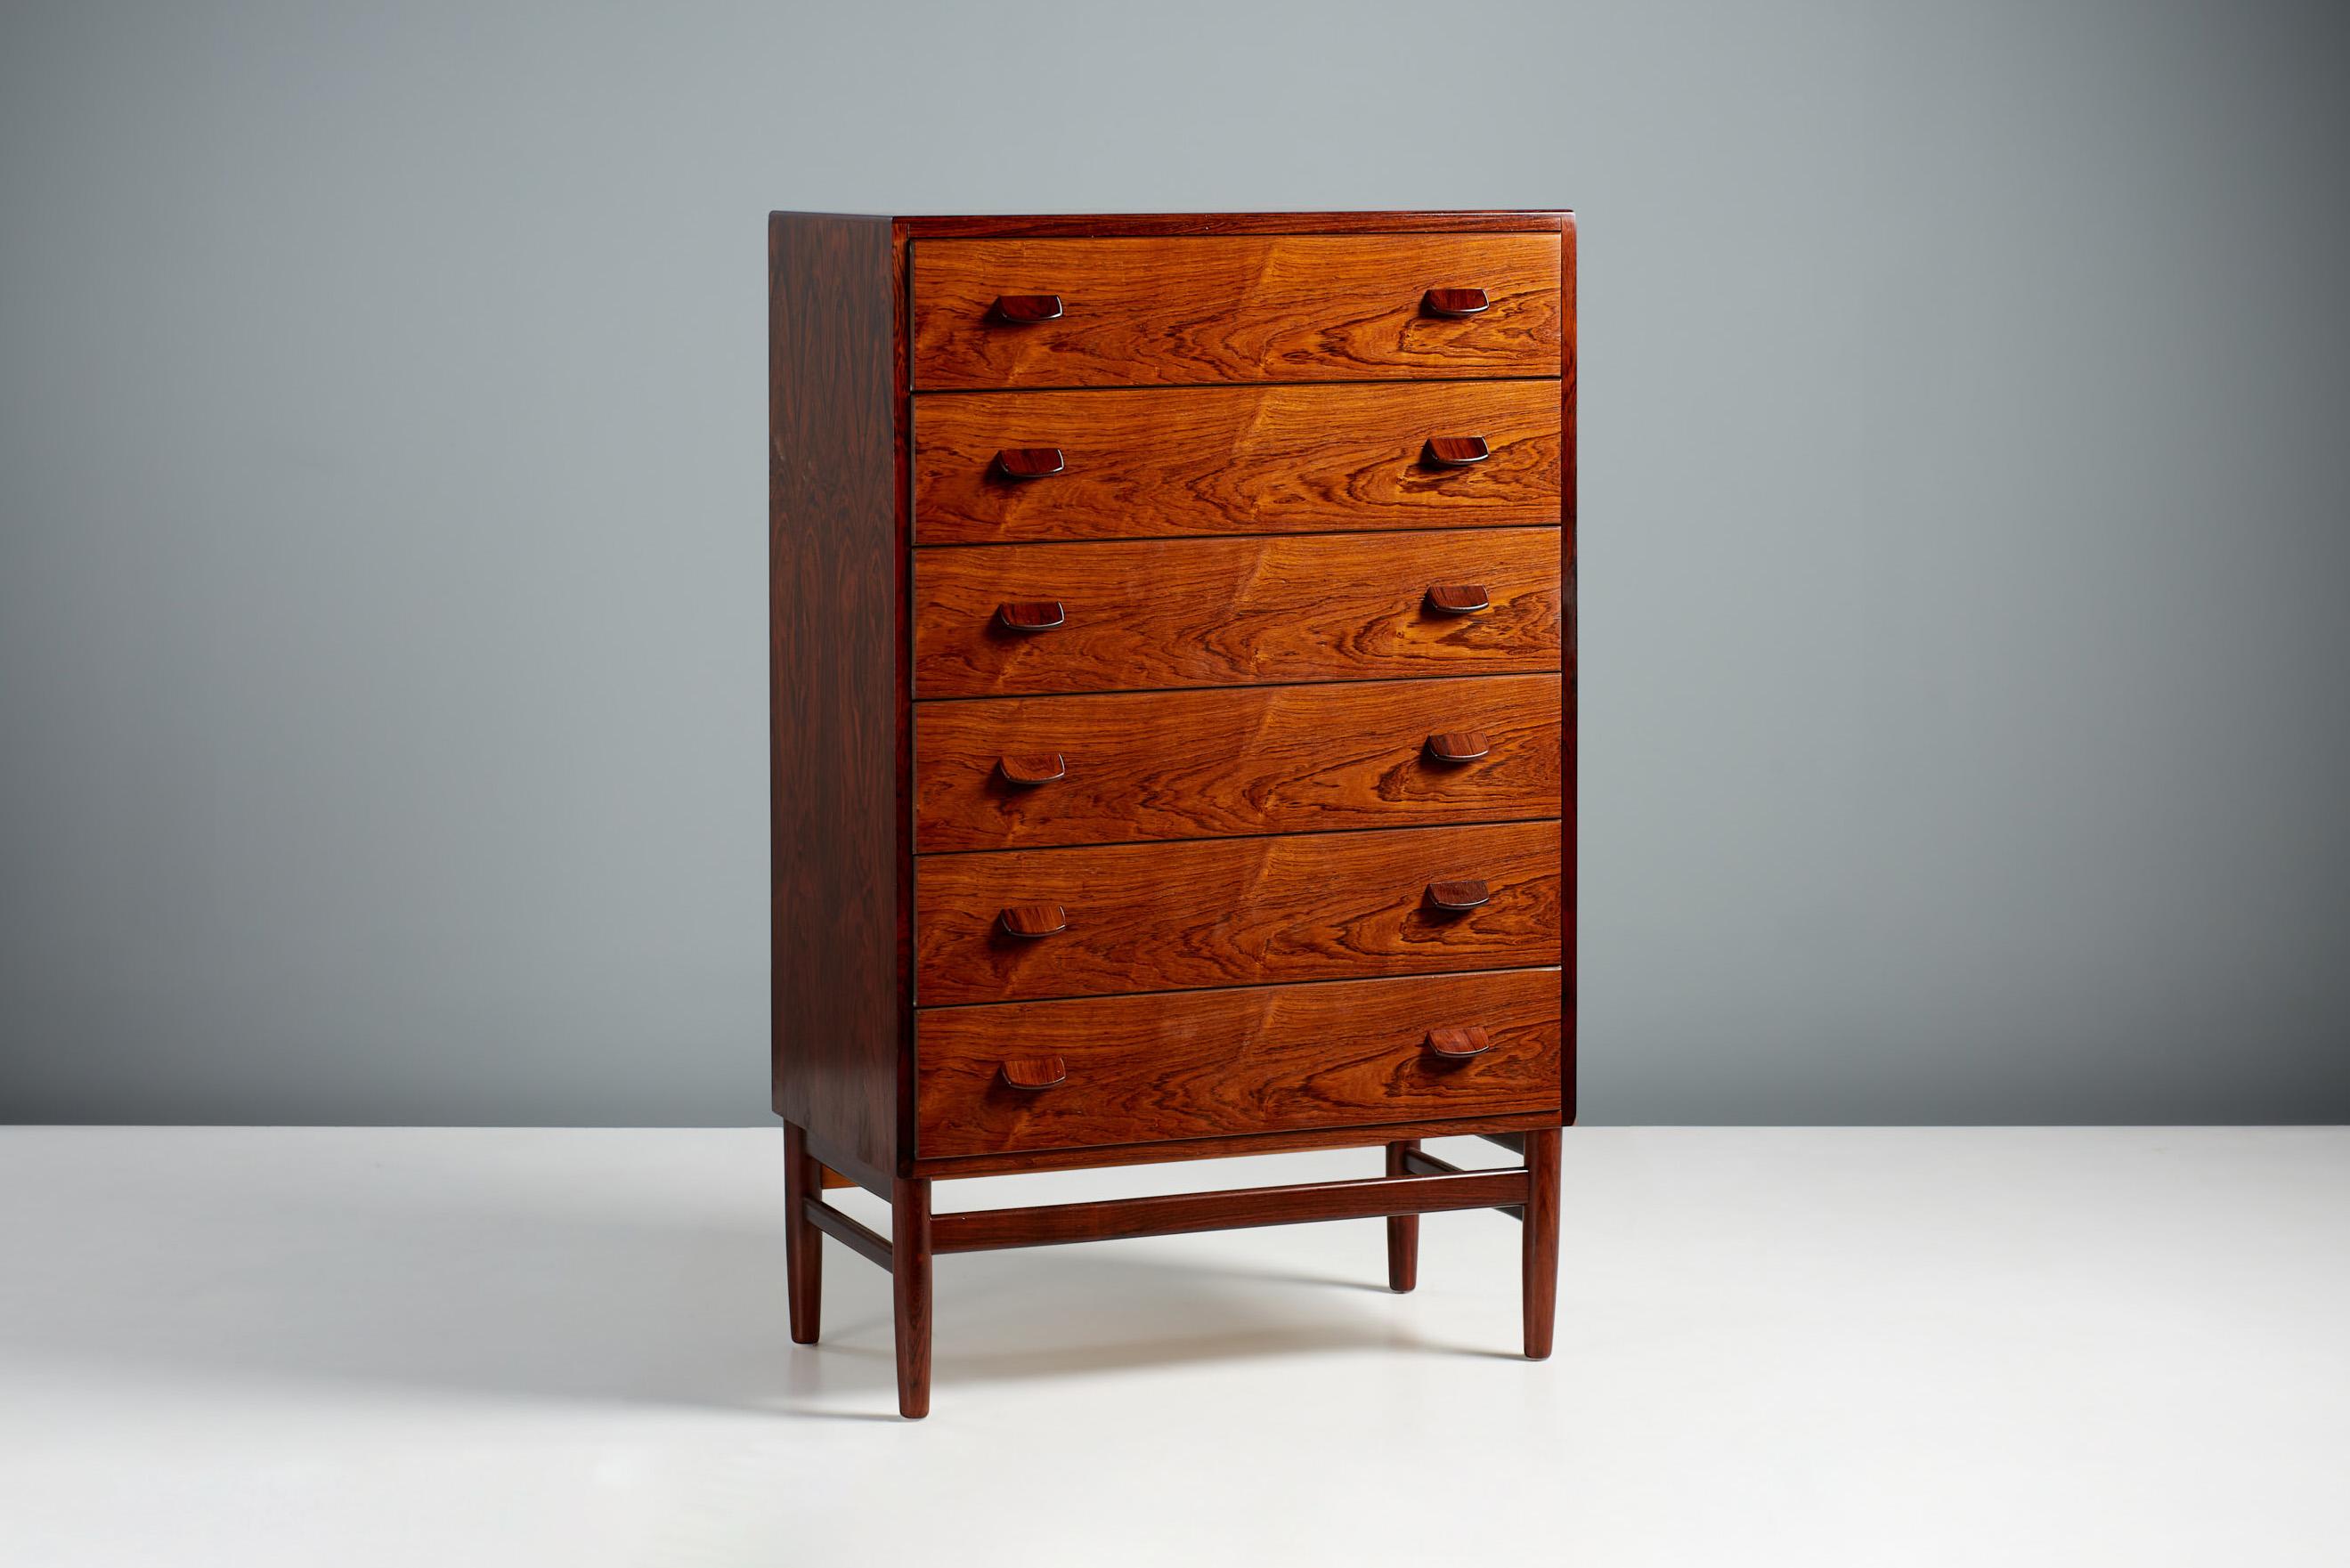 Scandinavian Modern Poul Volther Tall Rosewood Chest of Drawers, circa 1960s For Sale